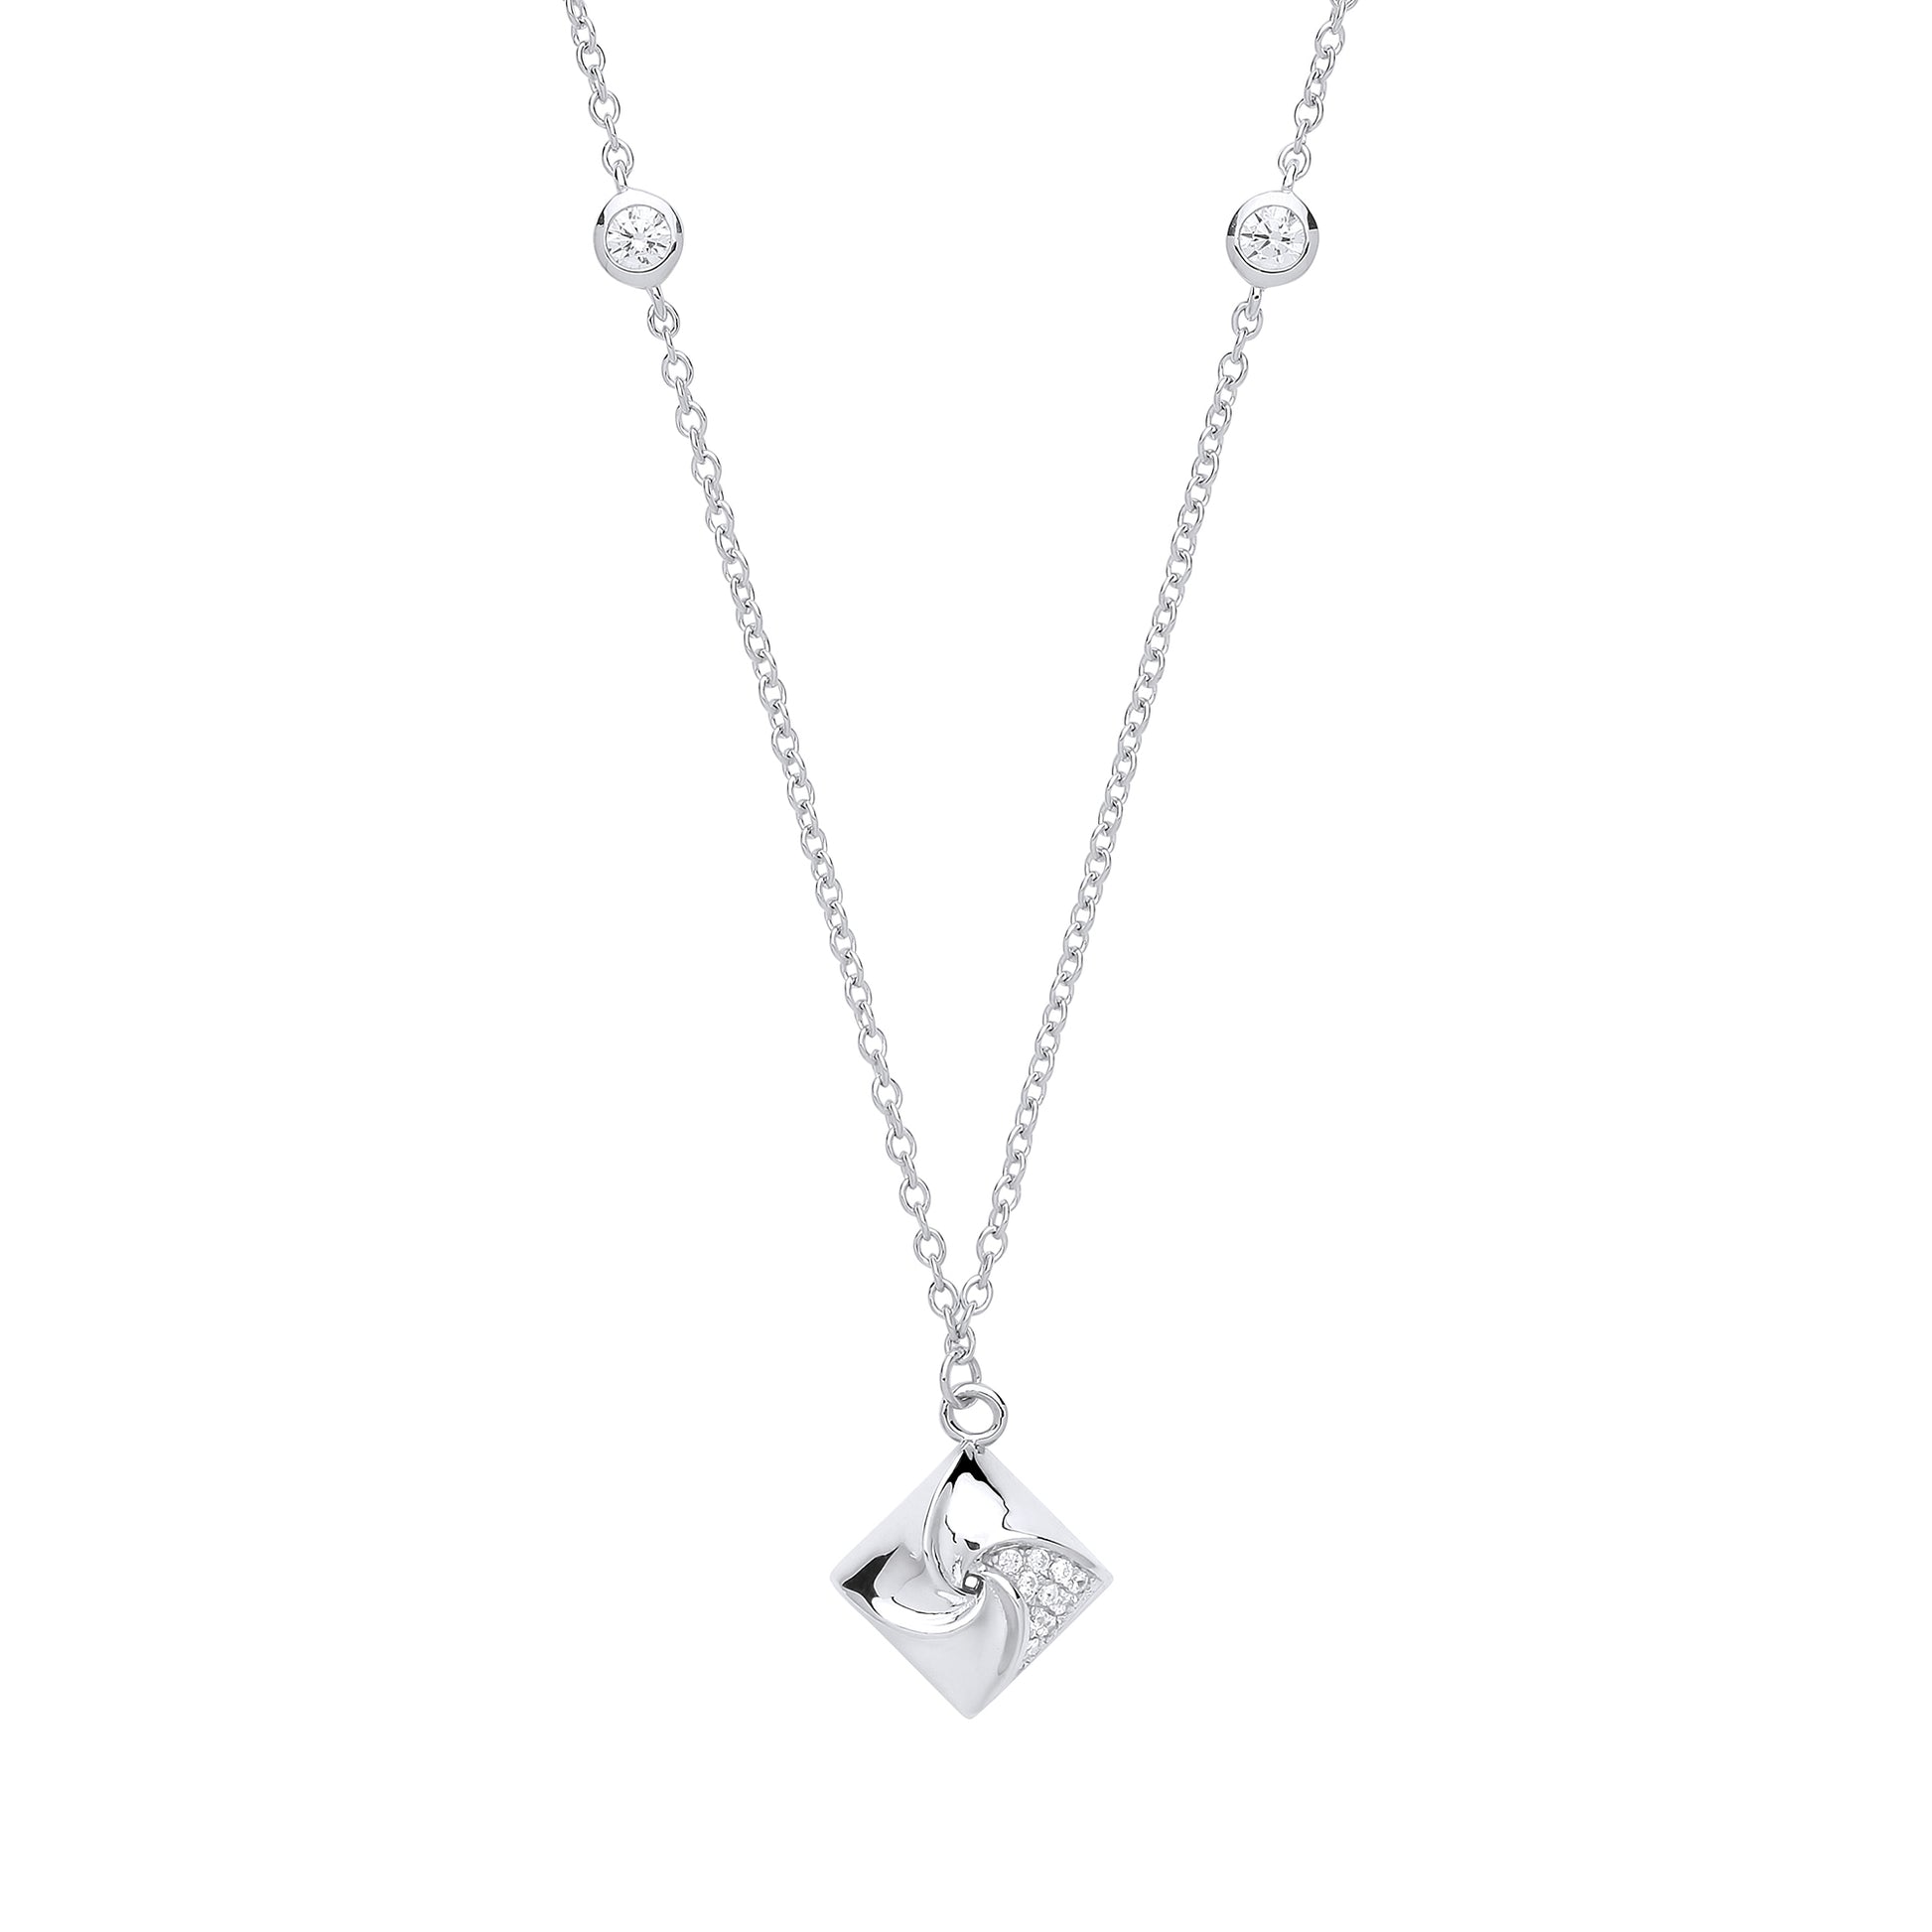 Silver  CZ Swirling Square Charm Necklace 18 inch - GVK254